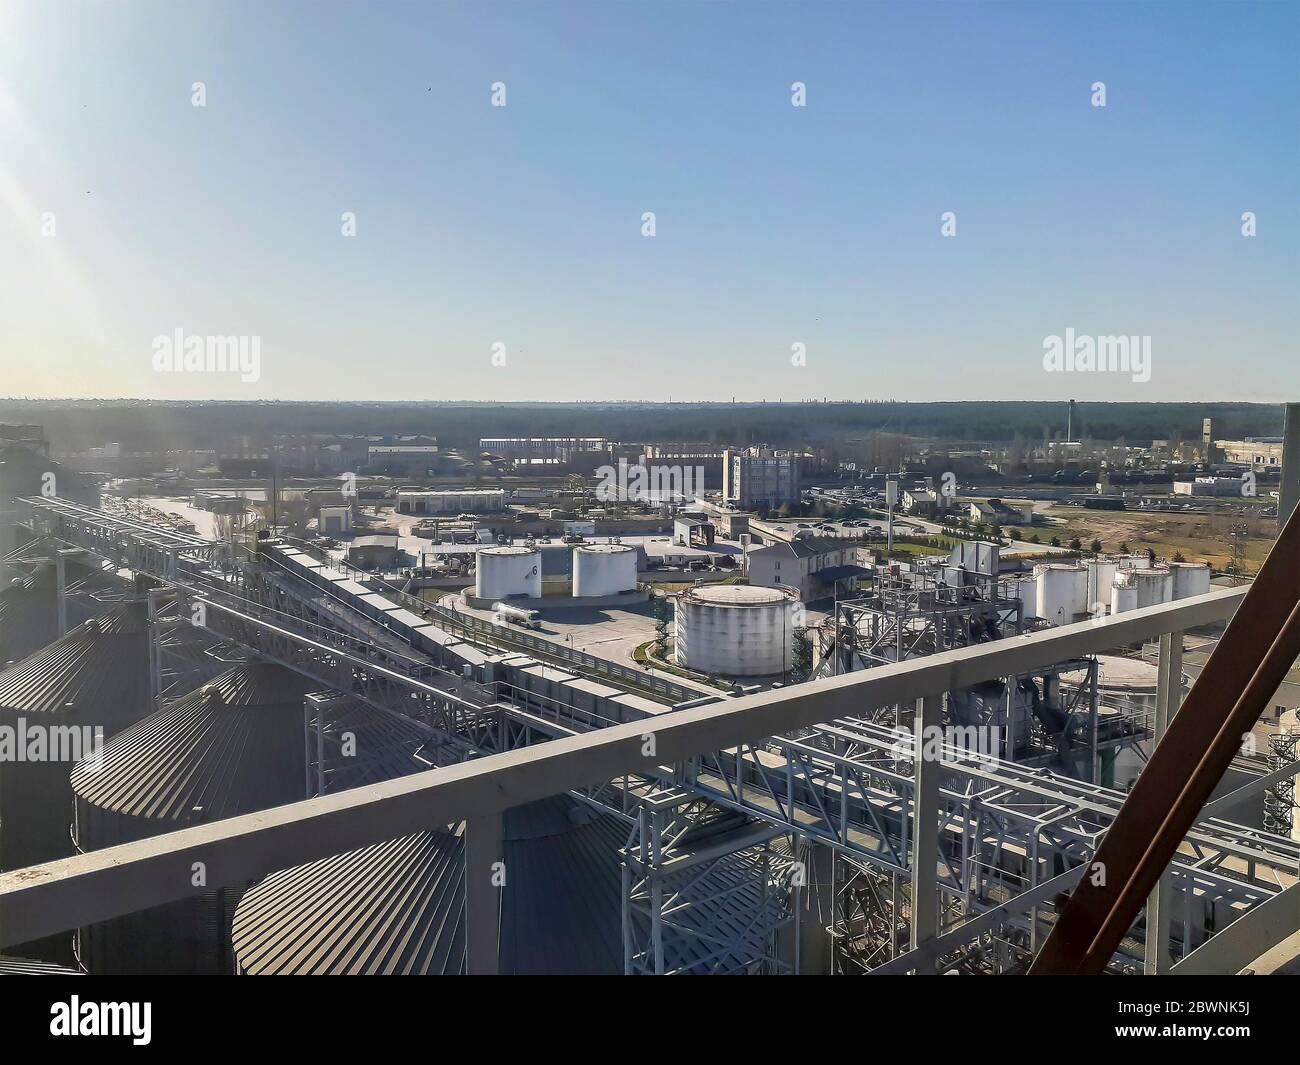 Grain and oil terminals of a modern sea commercial port top view. In the foreground is a silo for storing grain. Tanks for oil and fuel in the backgro Stock Photo